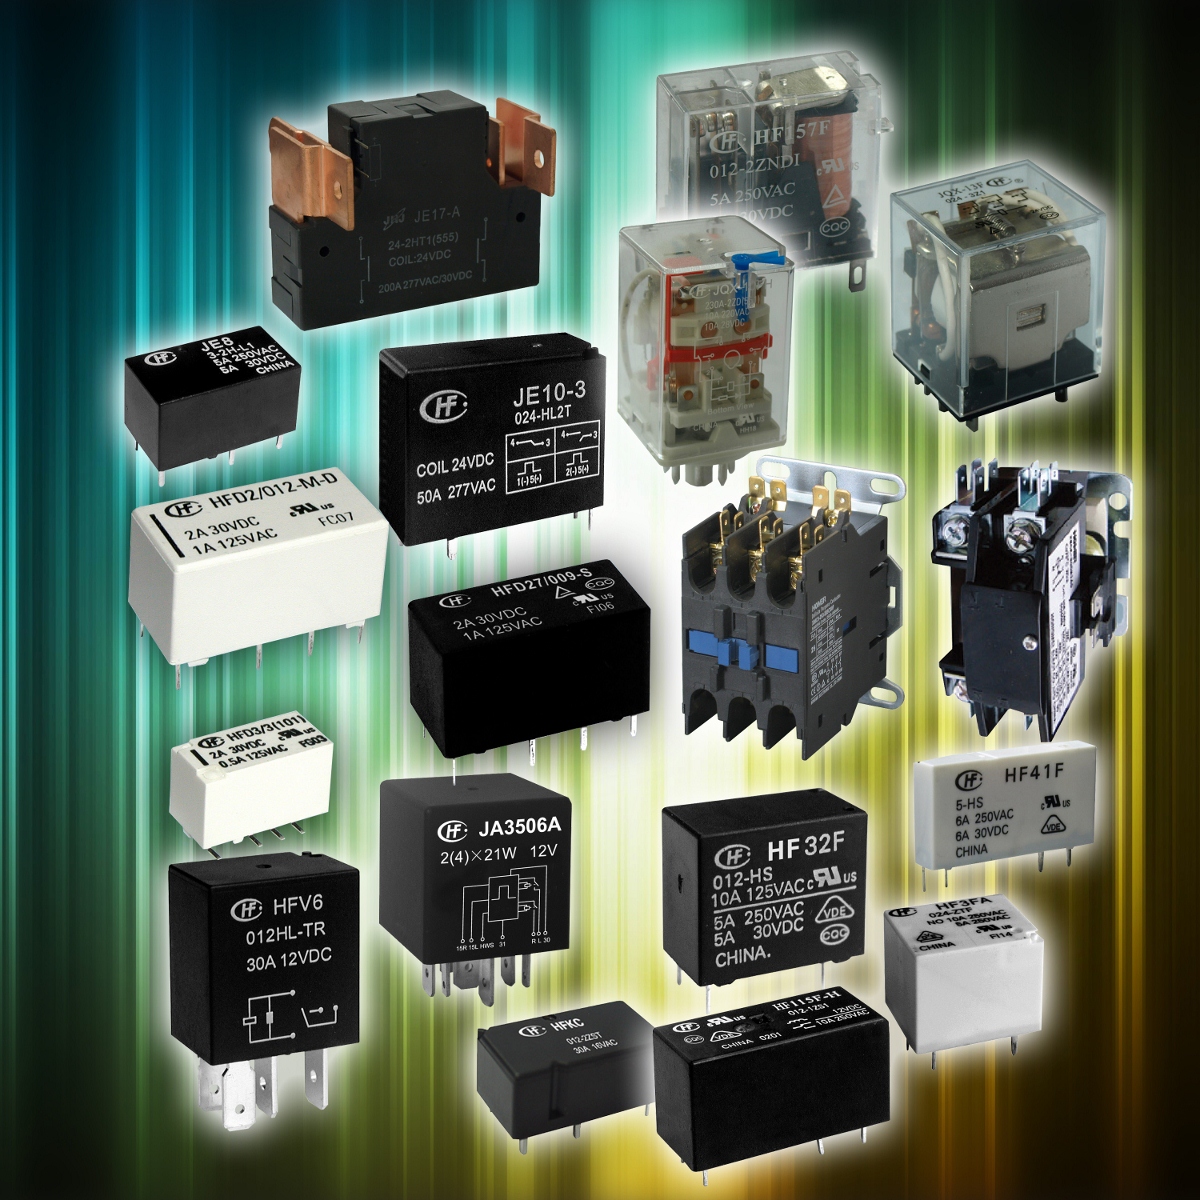 Complete Range of HONGFA Relays Available from Transonics - 160 series of relays - 40,000 different versions available